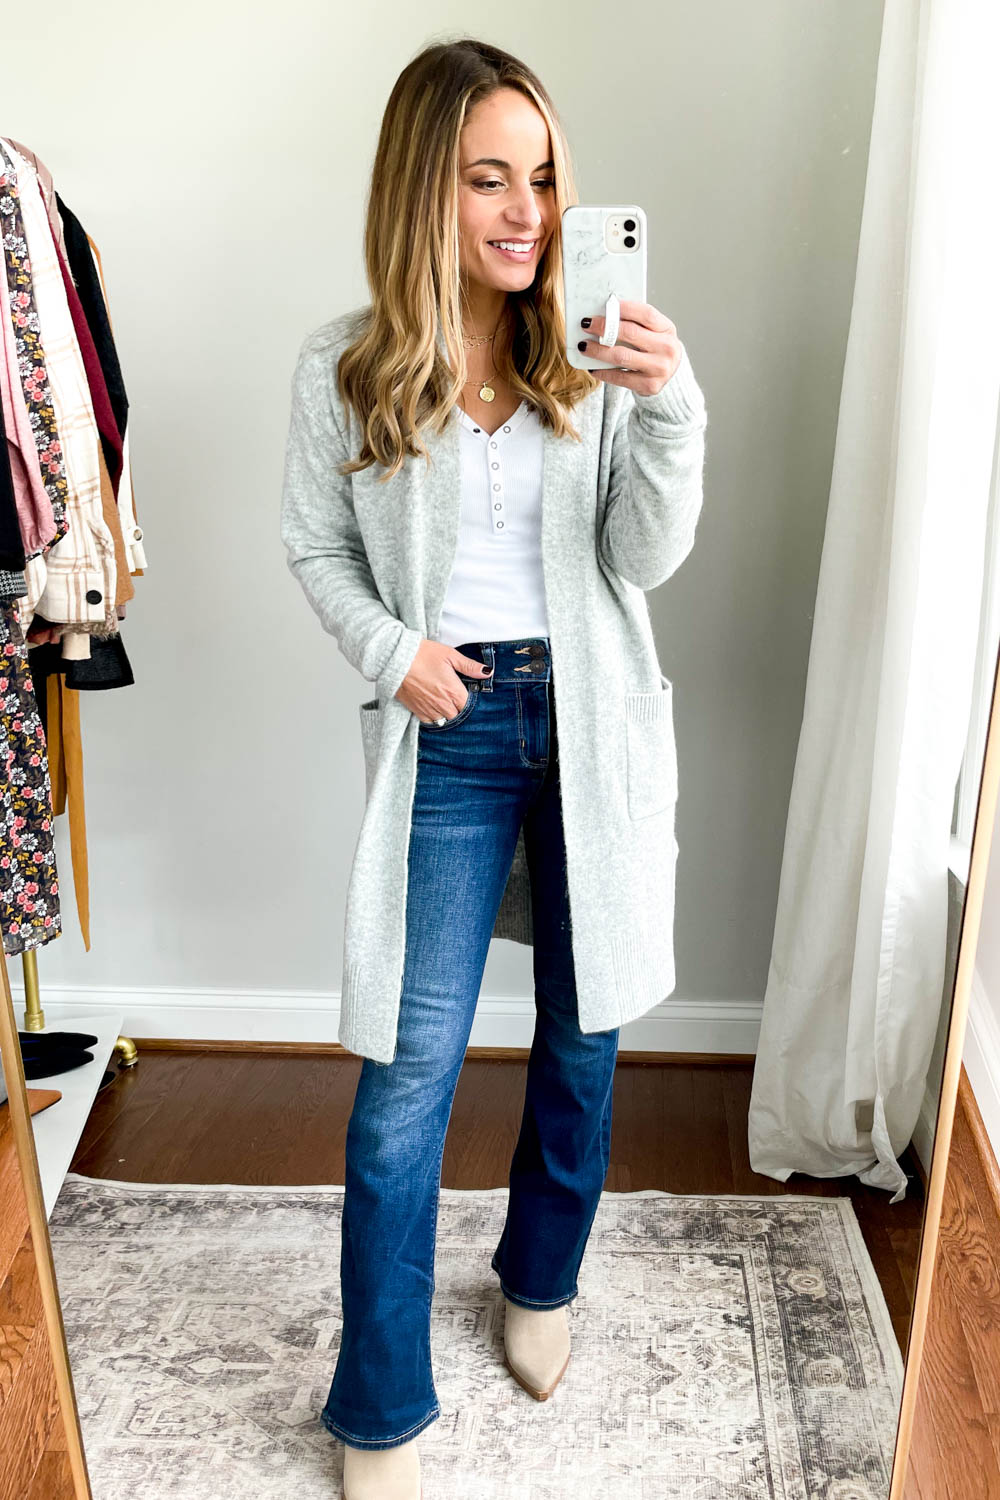 5 Shoes To Wear With Flare Jeans